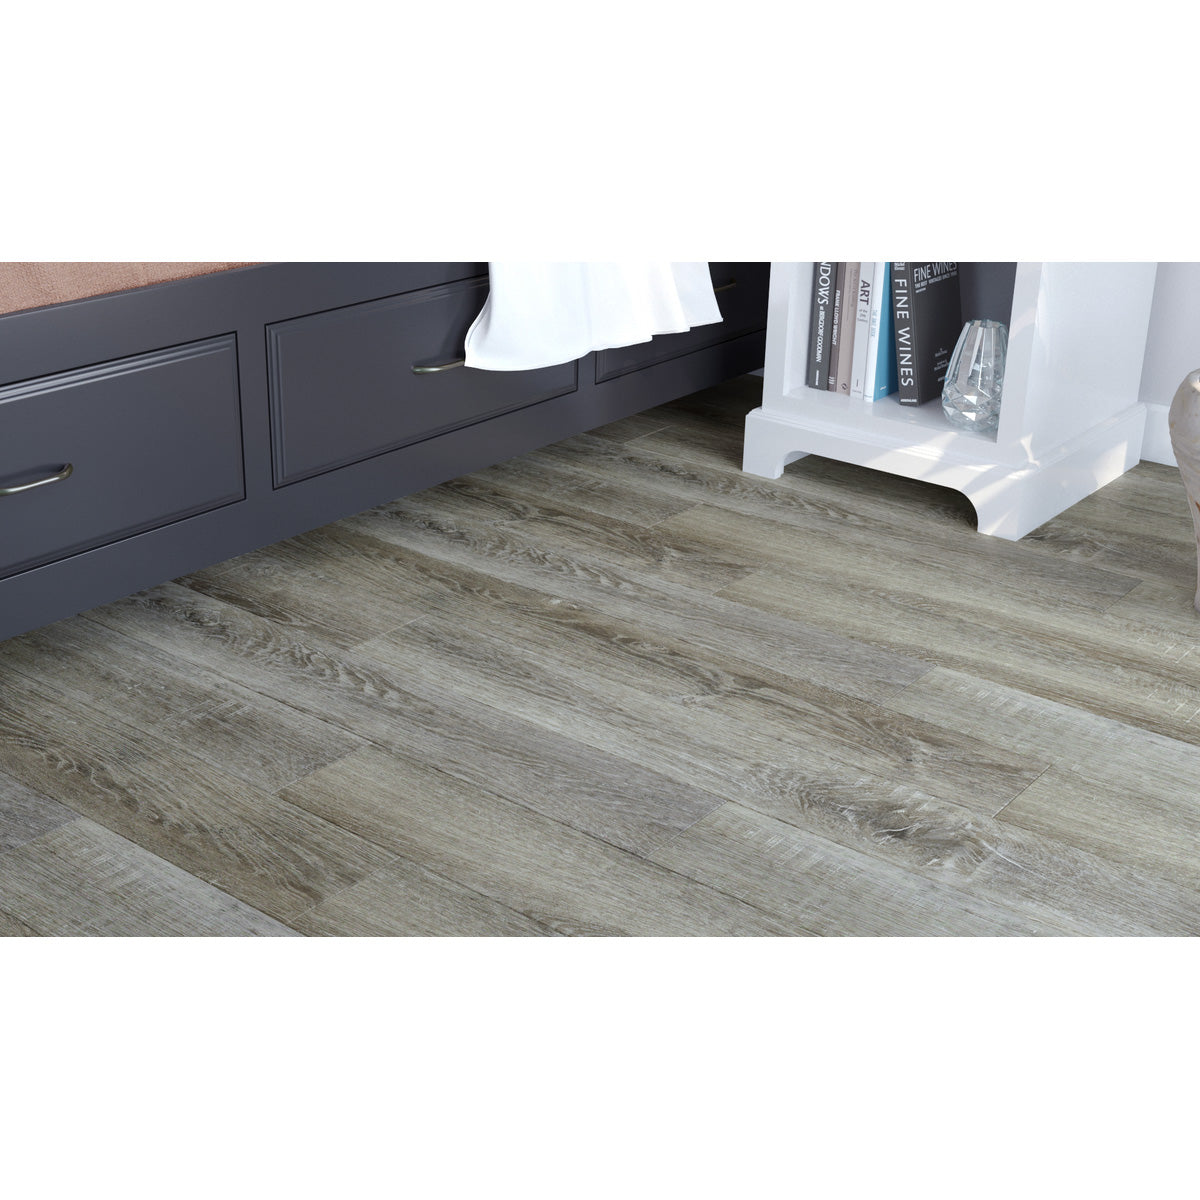 Engineered Floors - Triumph Collection - The New Standard II - 6 in. x 48 in. - Horseshoe Bay Bedroom View